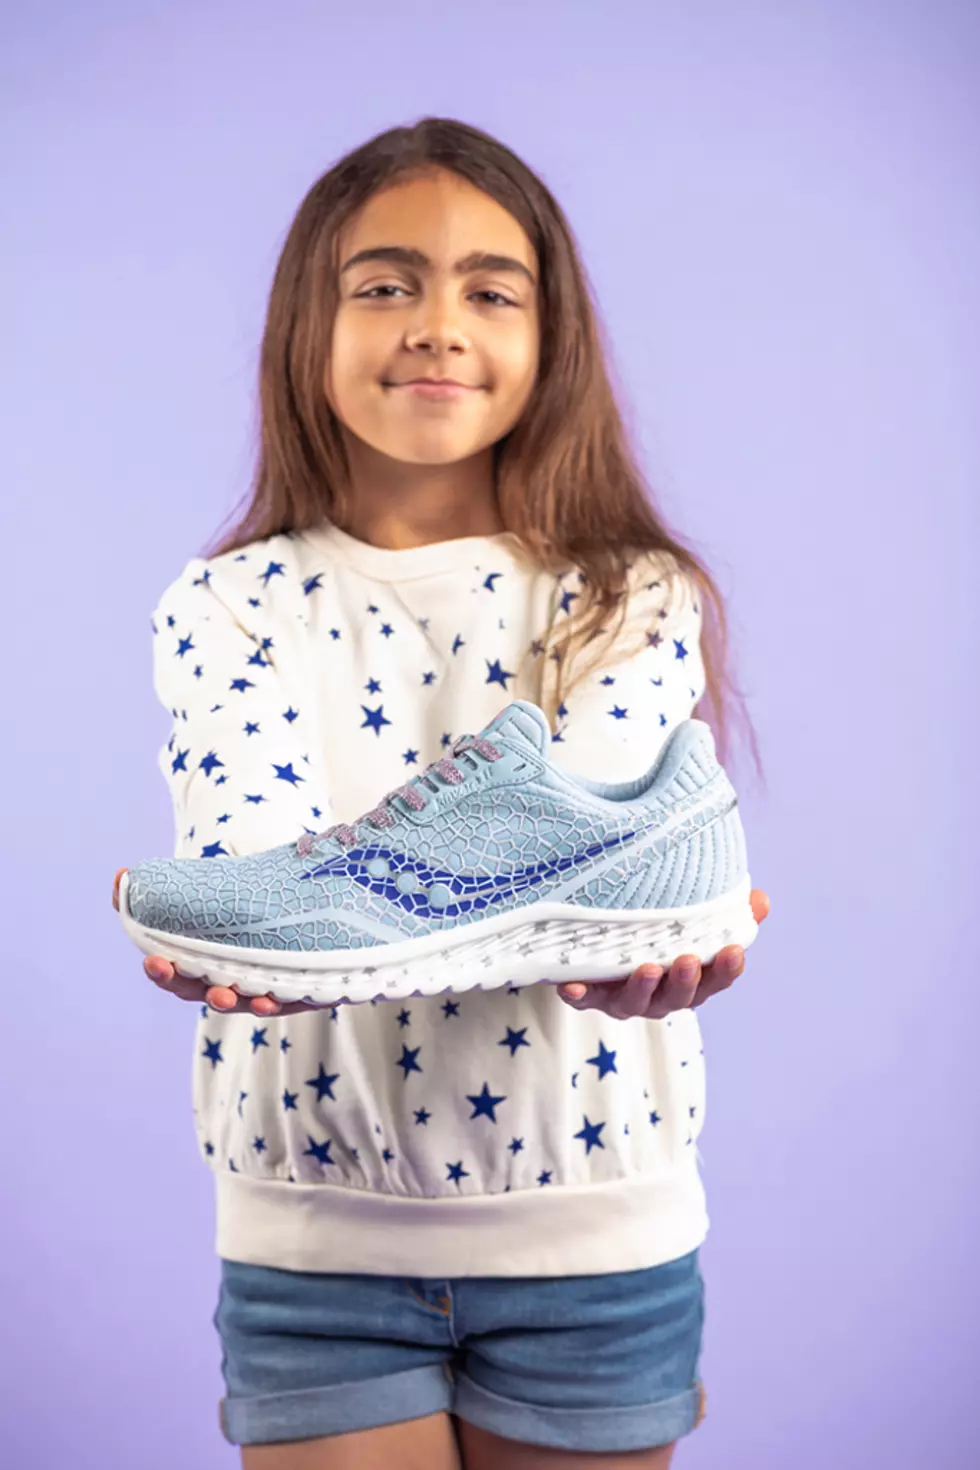 TMSG: Boston Children&#8217;s Hospital Patients Design Shoes For Kids Like Them